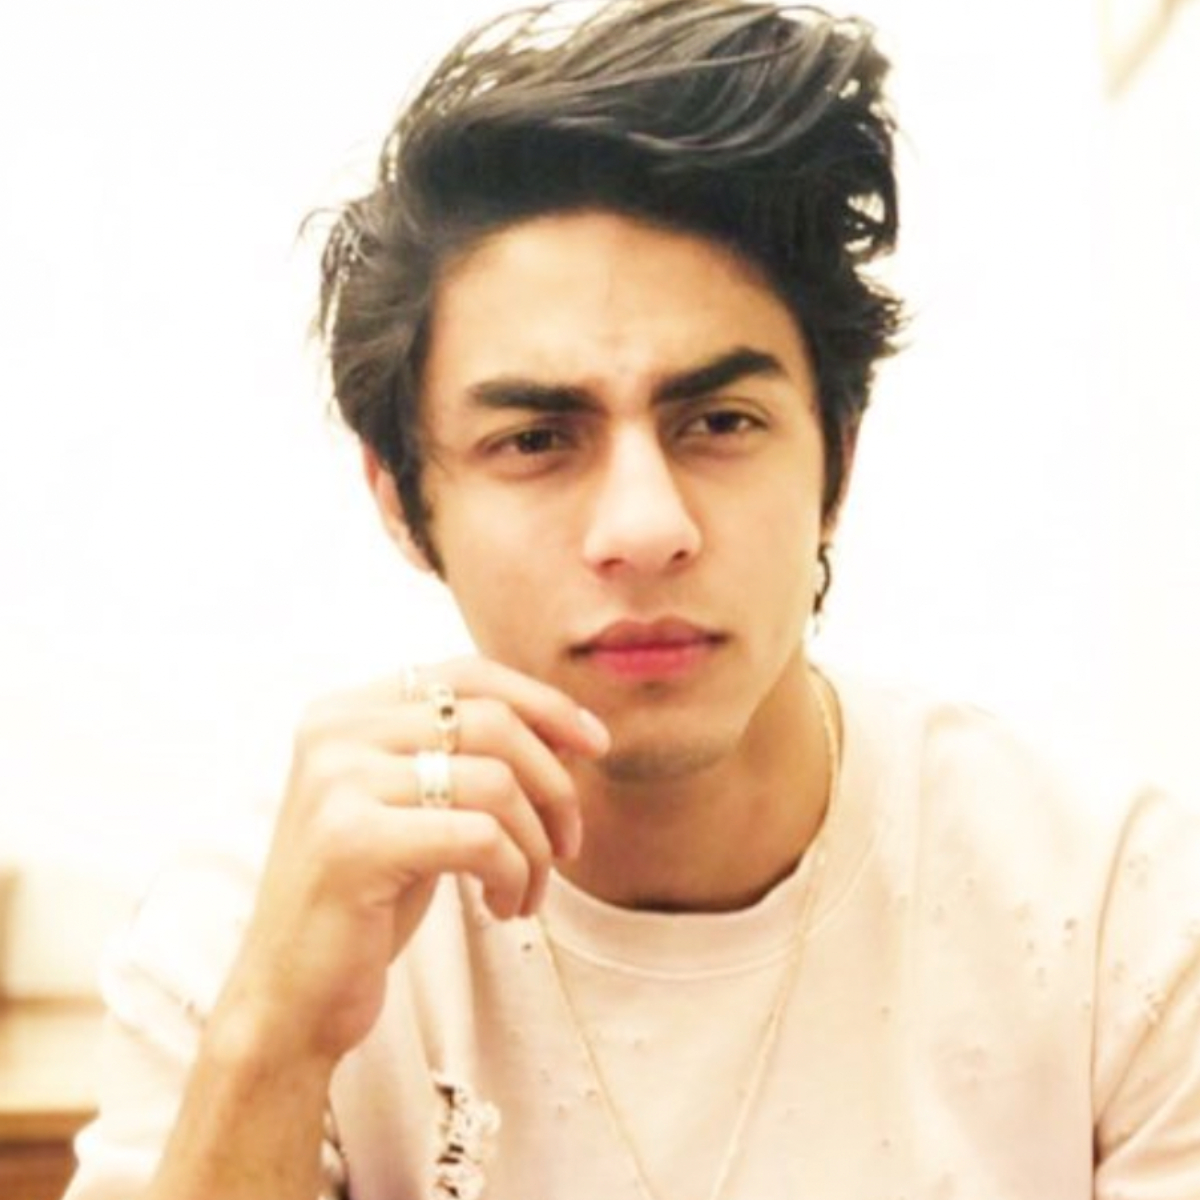 Aryan Khan to jet off to the US to work on a show